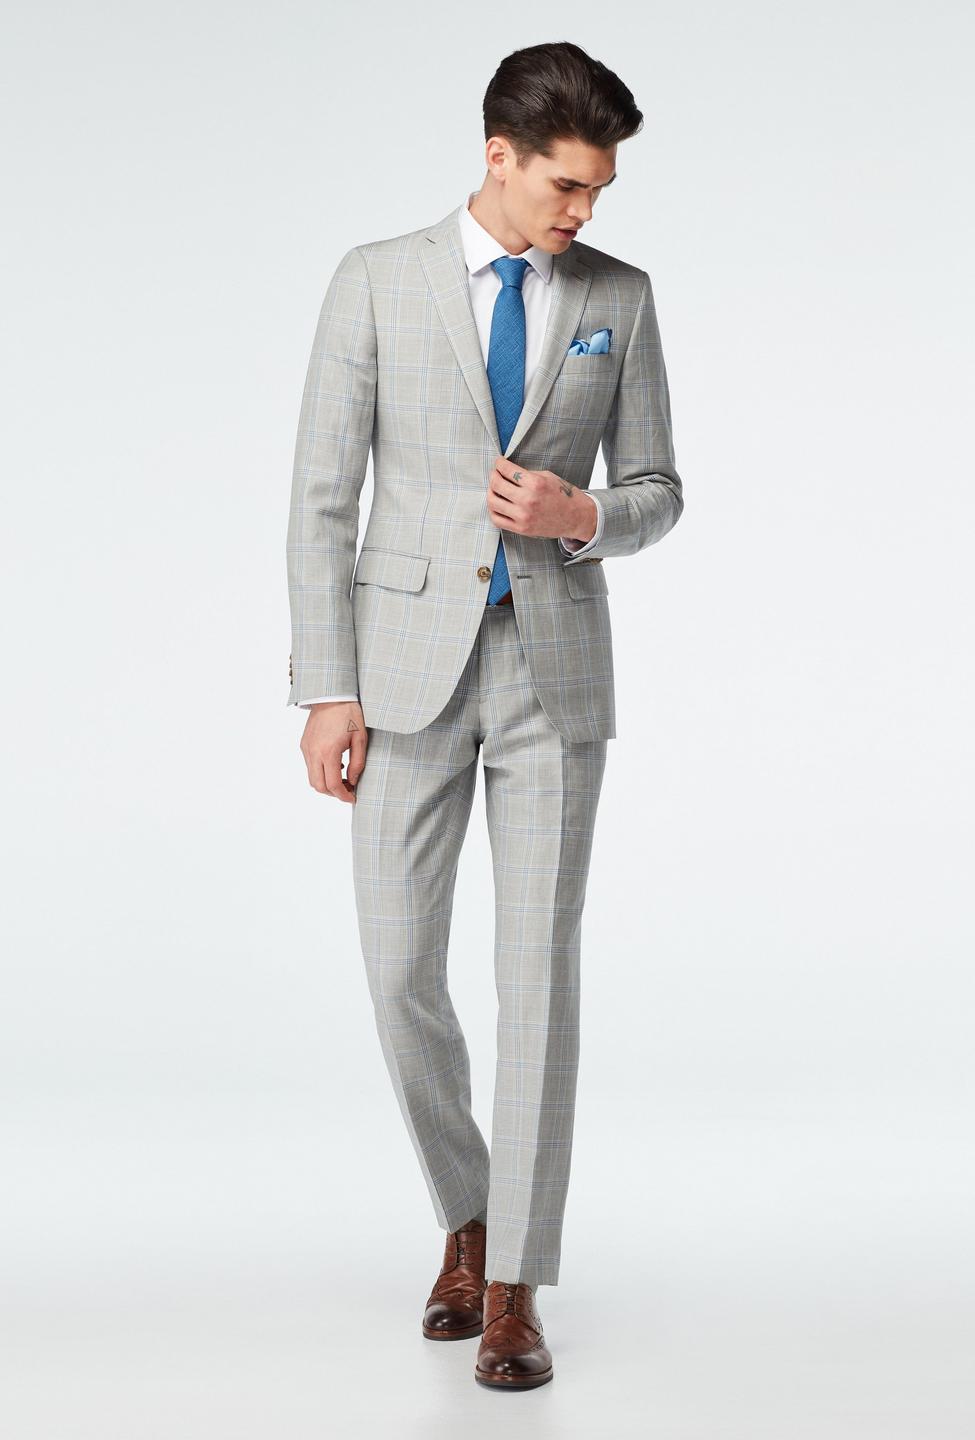 Gray suit - Southwell Plaid Design from Seasonal Indochino Collection